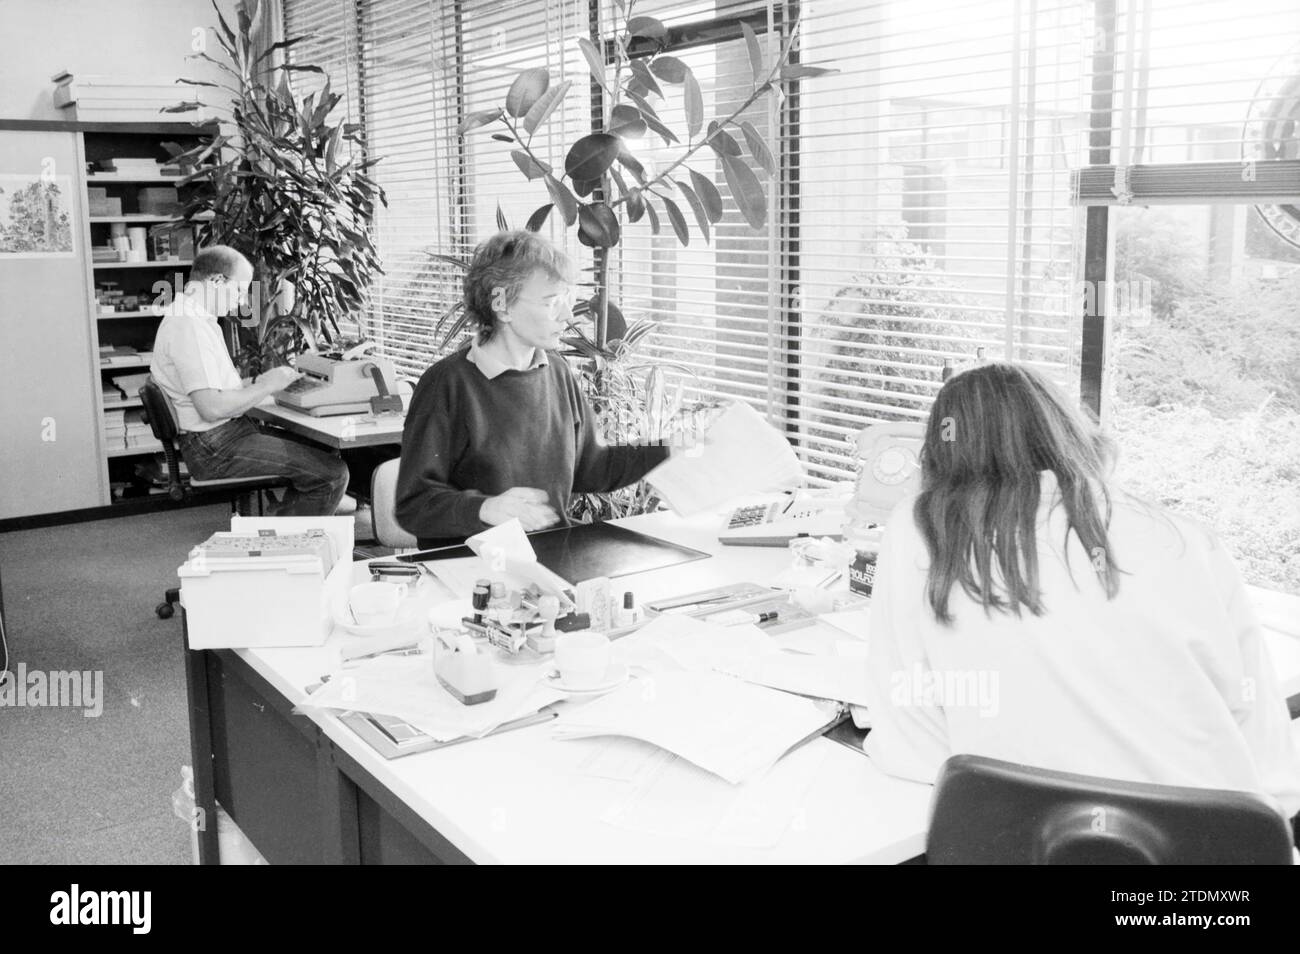 Working in an administration office behind an IBM PC, 00-10-1986, Whizgle News from the Past, Tailored for the Future. Explore historical narratives, Dutch The Netherlands agency image with a modern perspective, bridging the gap between yesterday's events and tomorrow's insights. A timeless journey shaping the stories that shape our future Stock Photo